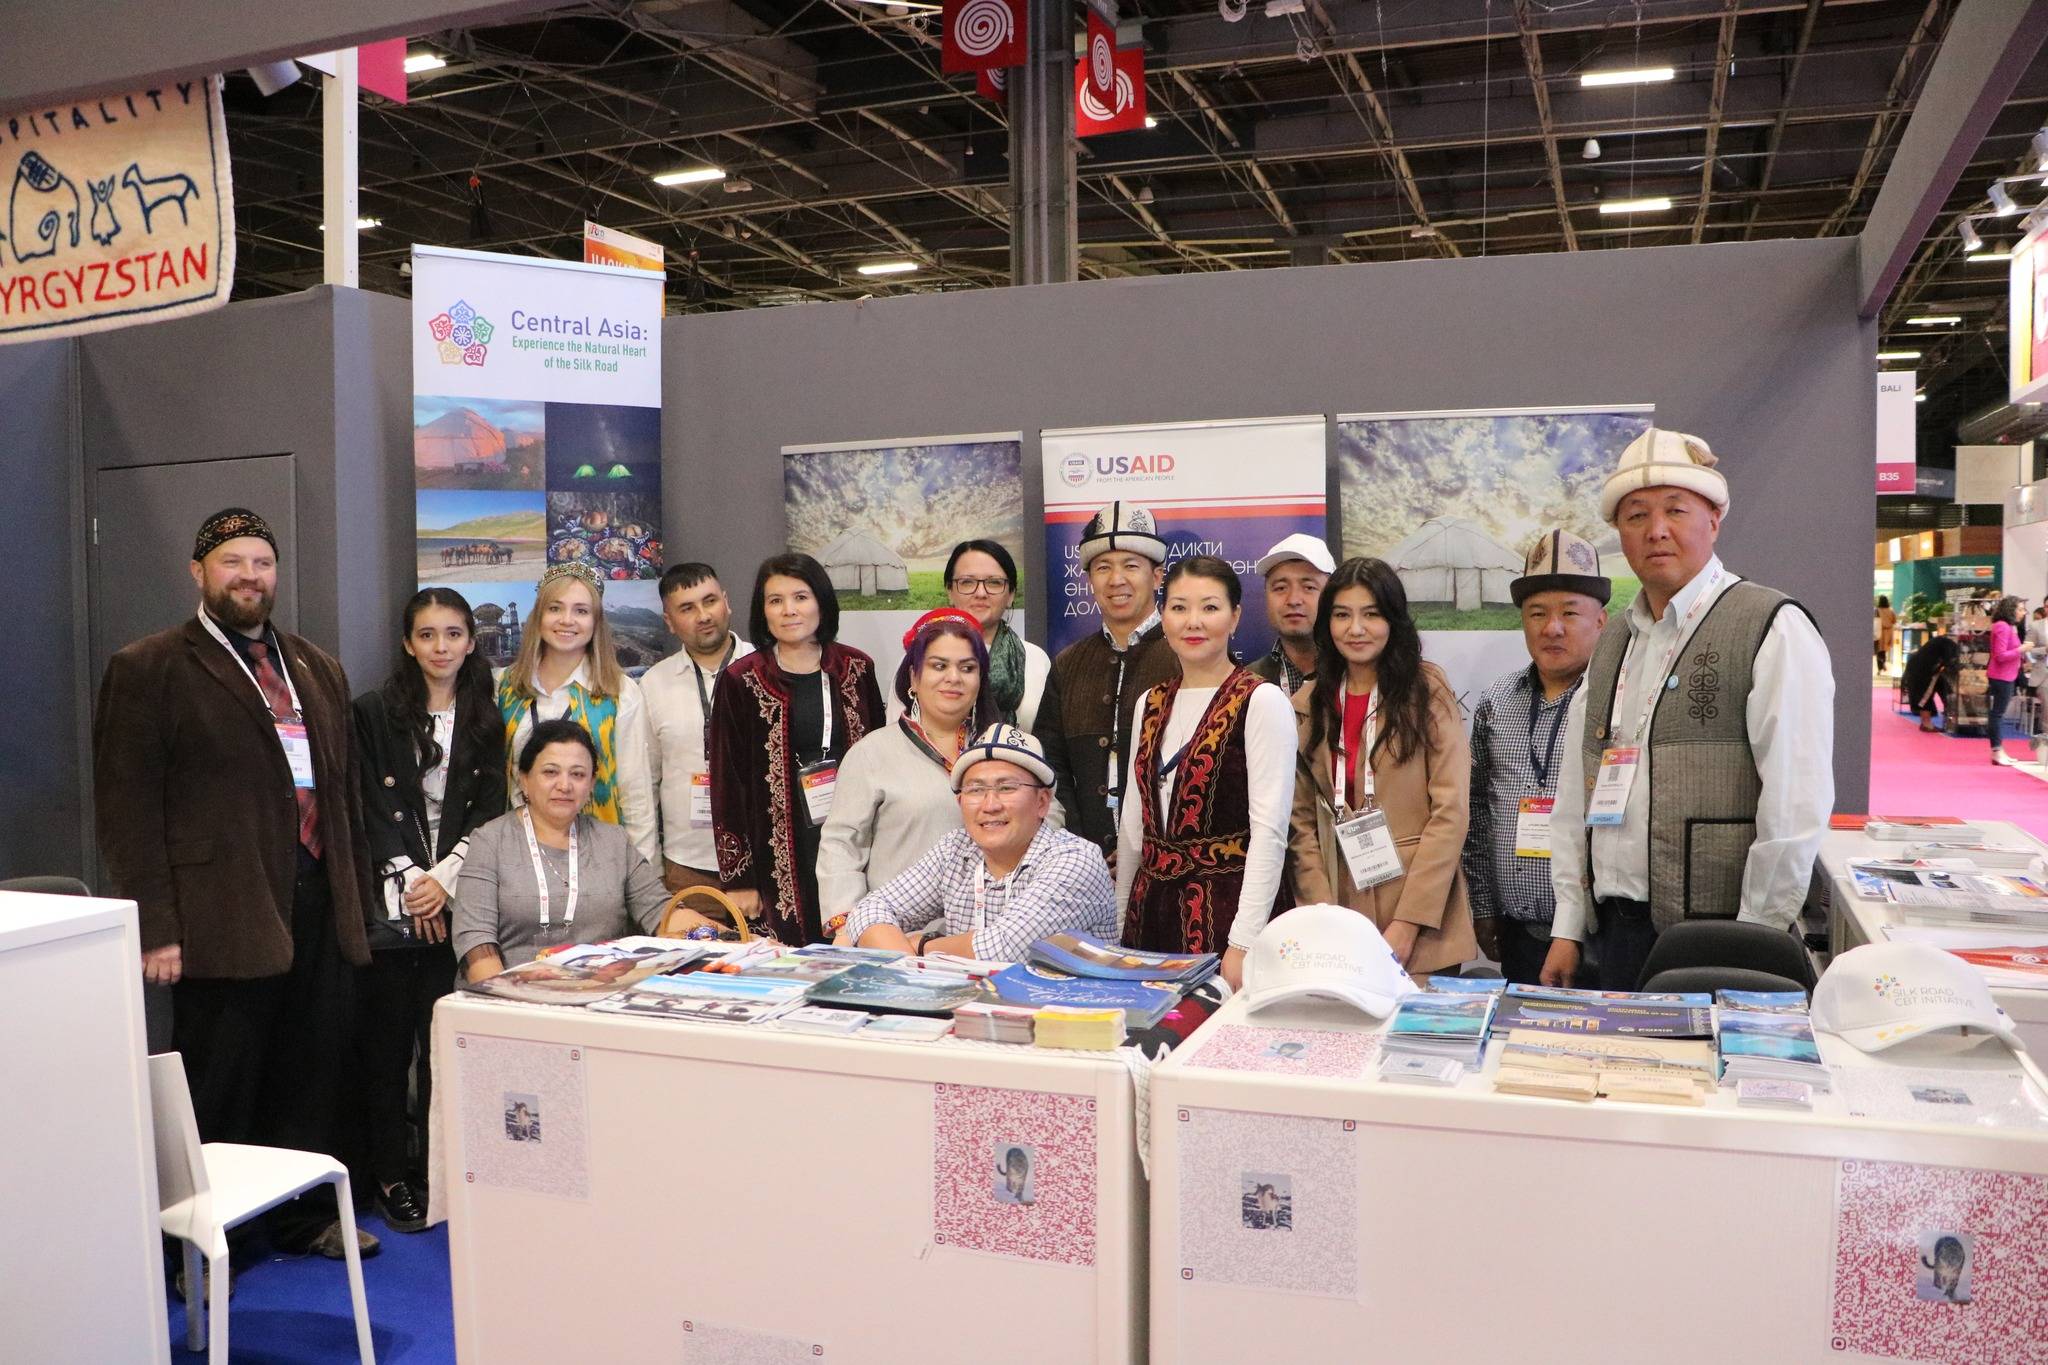 Promoting energy efficiency and renewable energy production in the community-based tourism sector in Central Asia (SET)